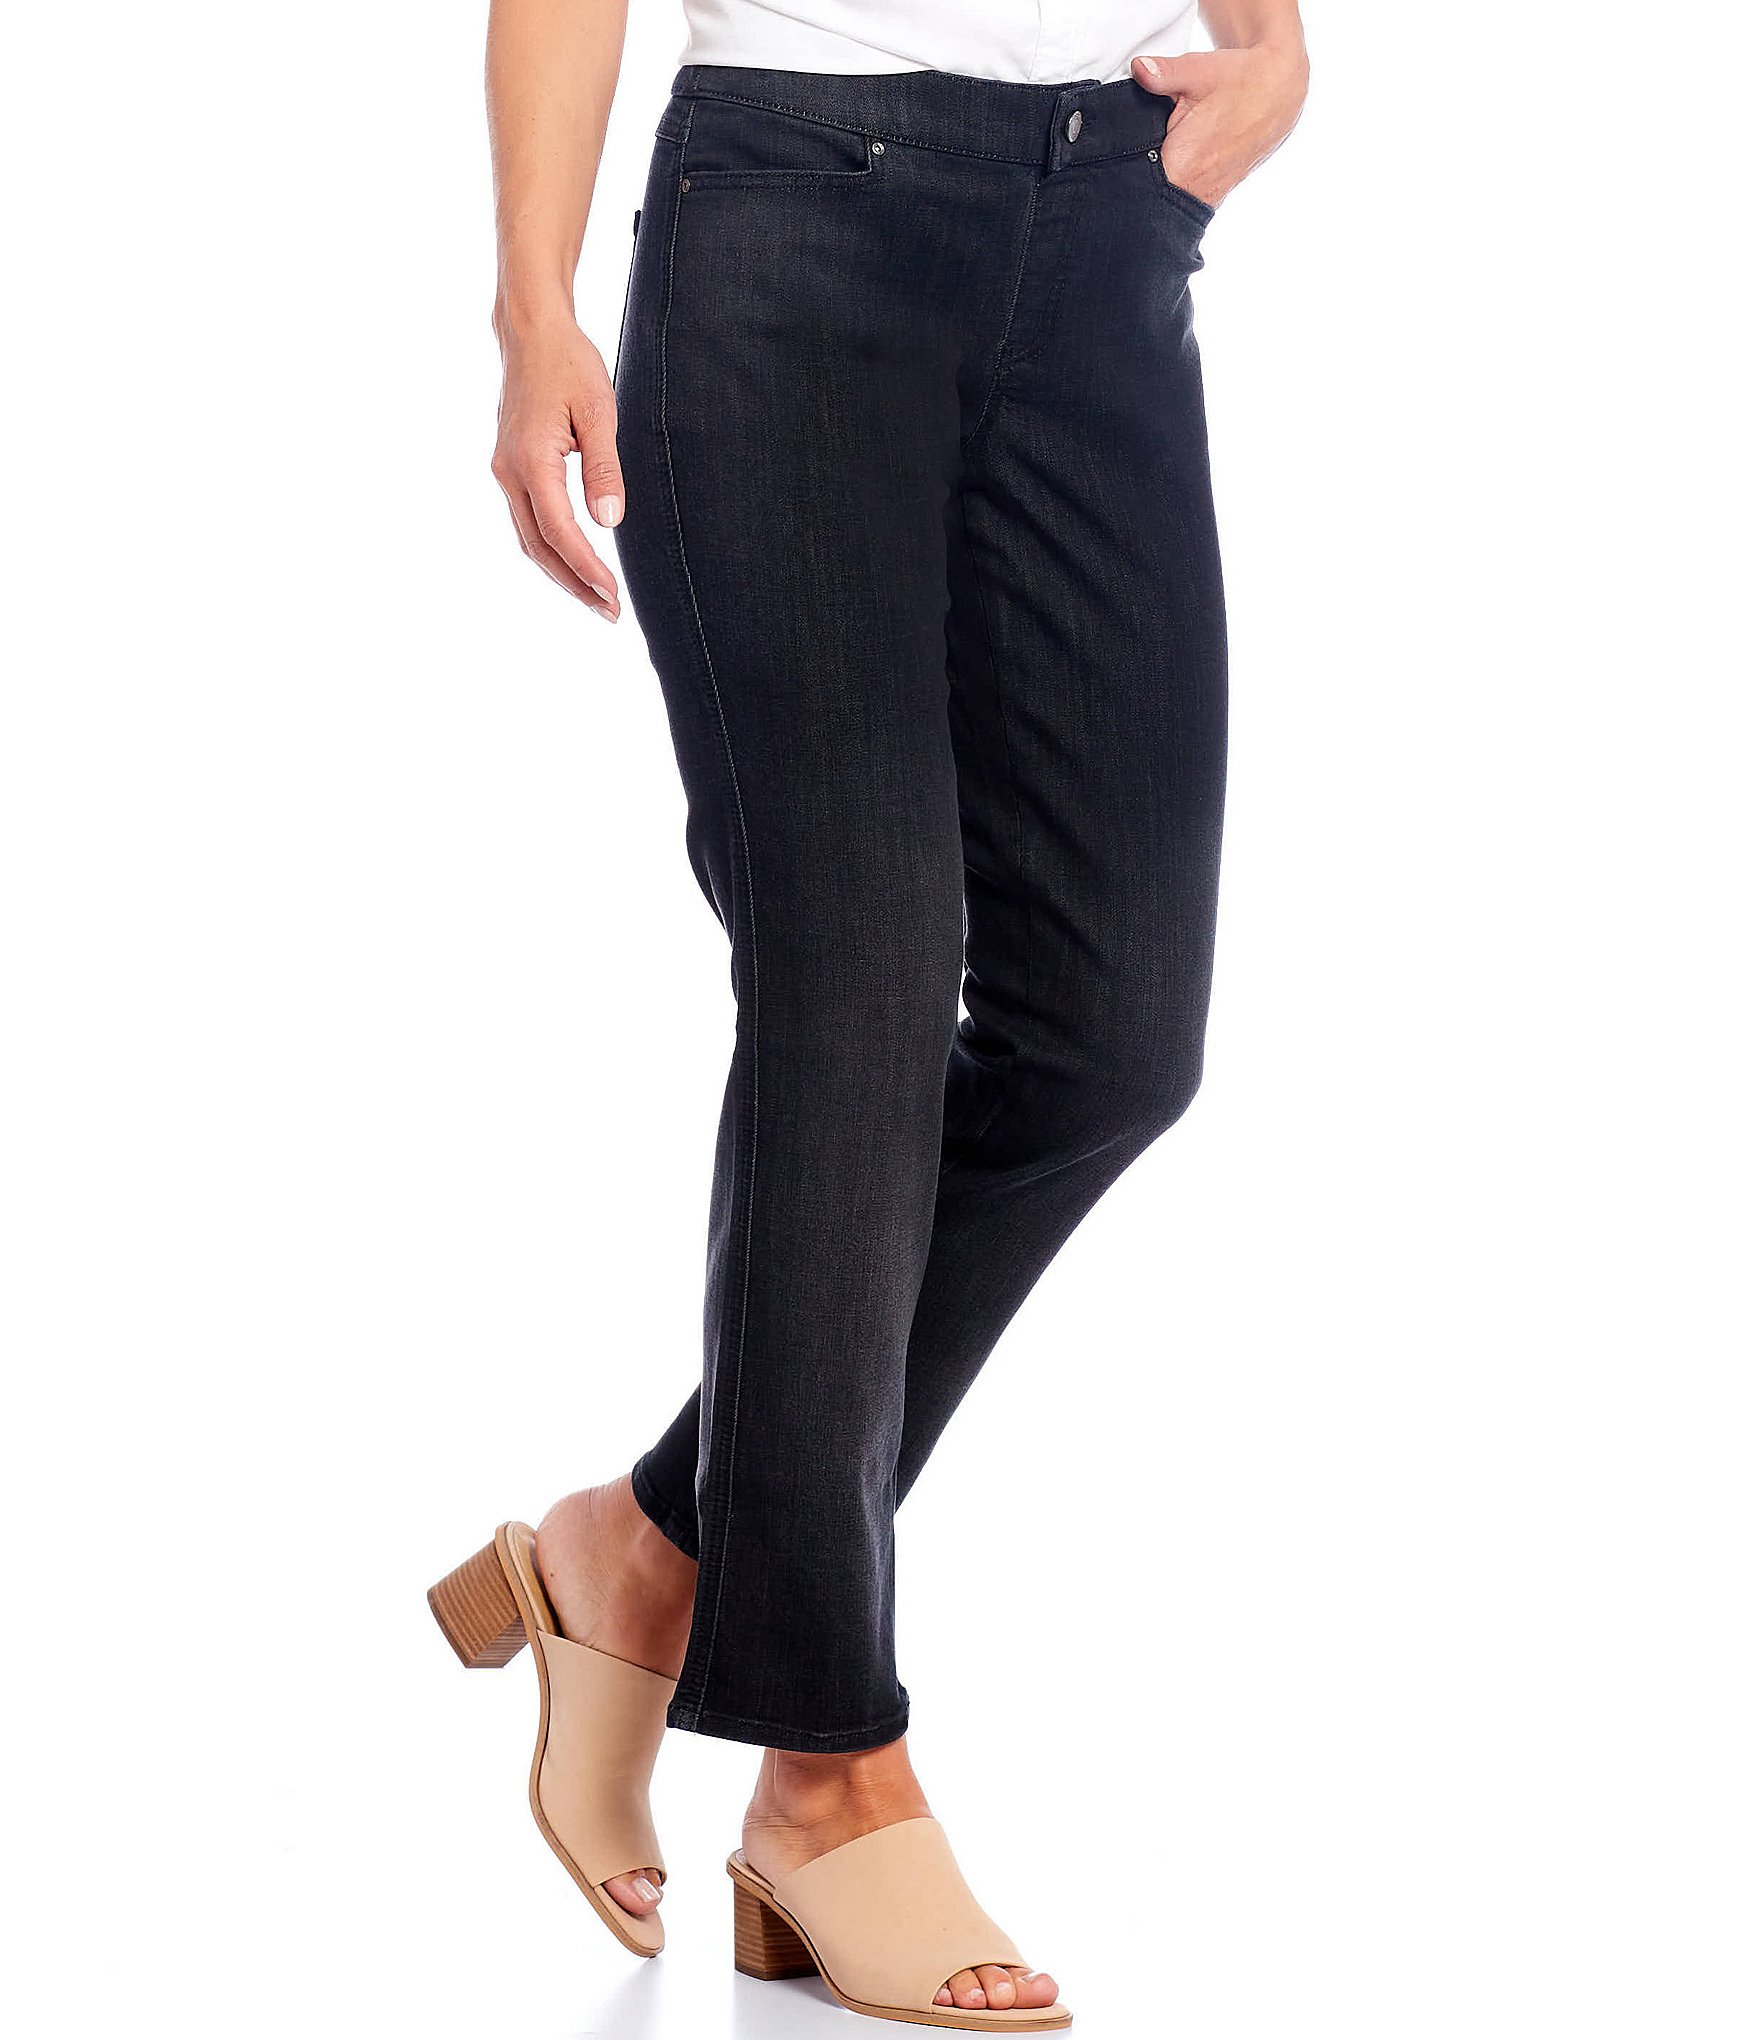 Denim & Co. Active Petite Duo Stretch Pull-On Legging-Navy-Petite XS  A399757